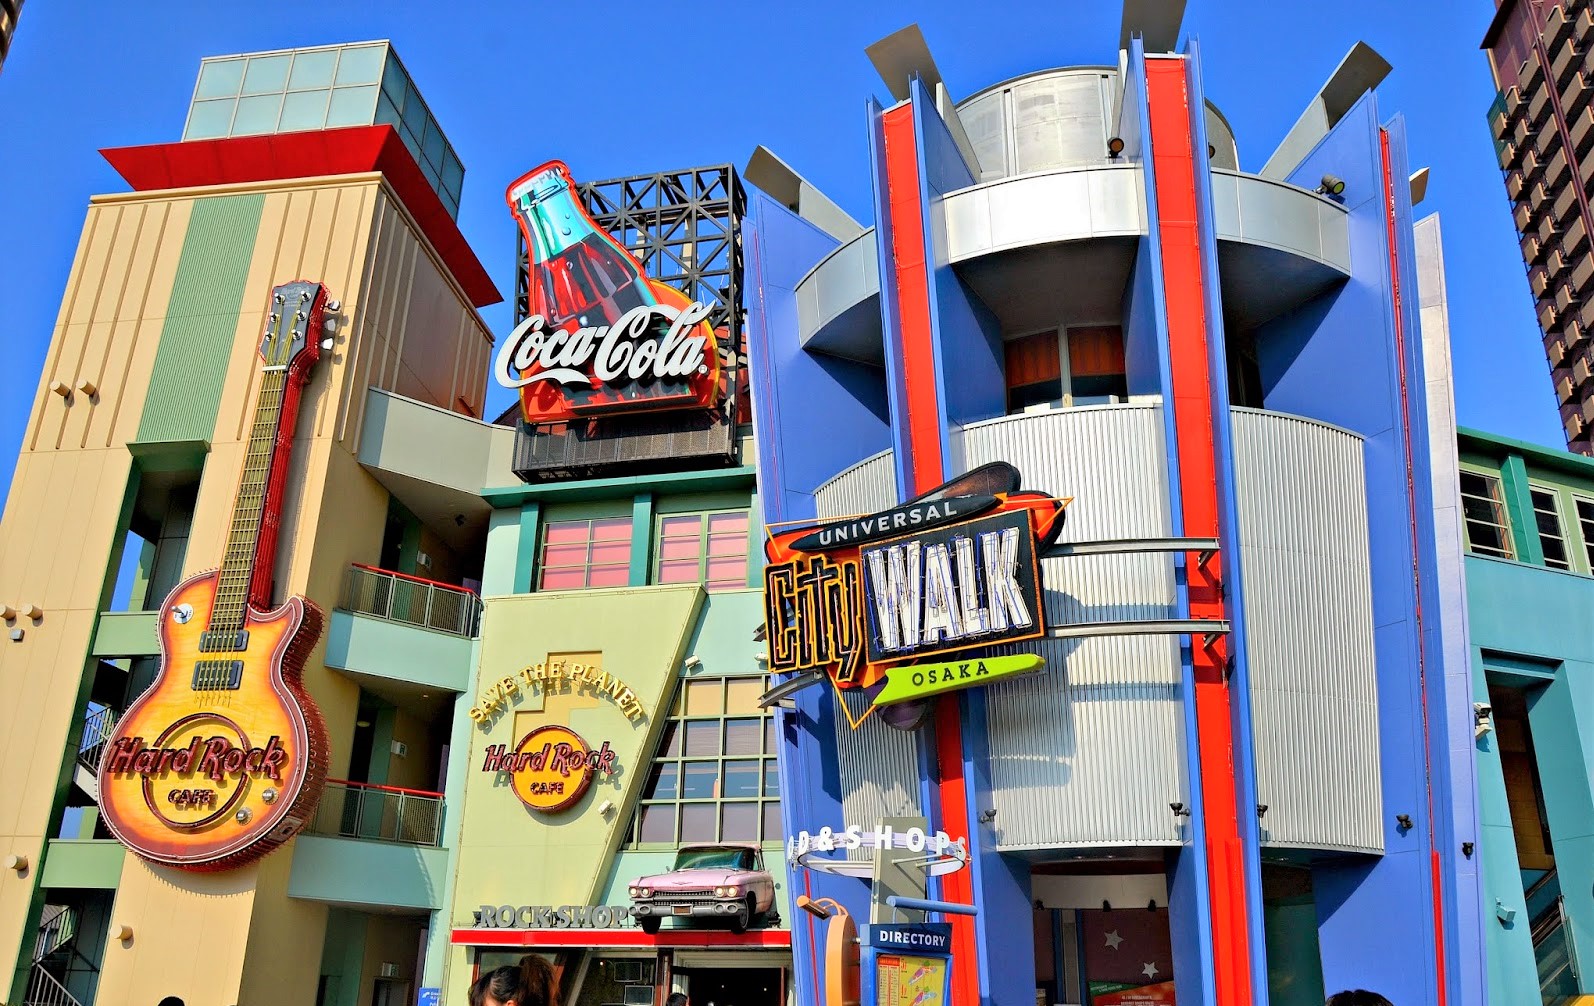 Universal Orlando Reopening June 5th with COVID-19 Precautions – Our